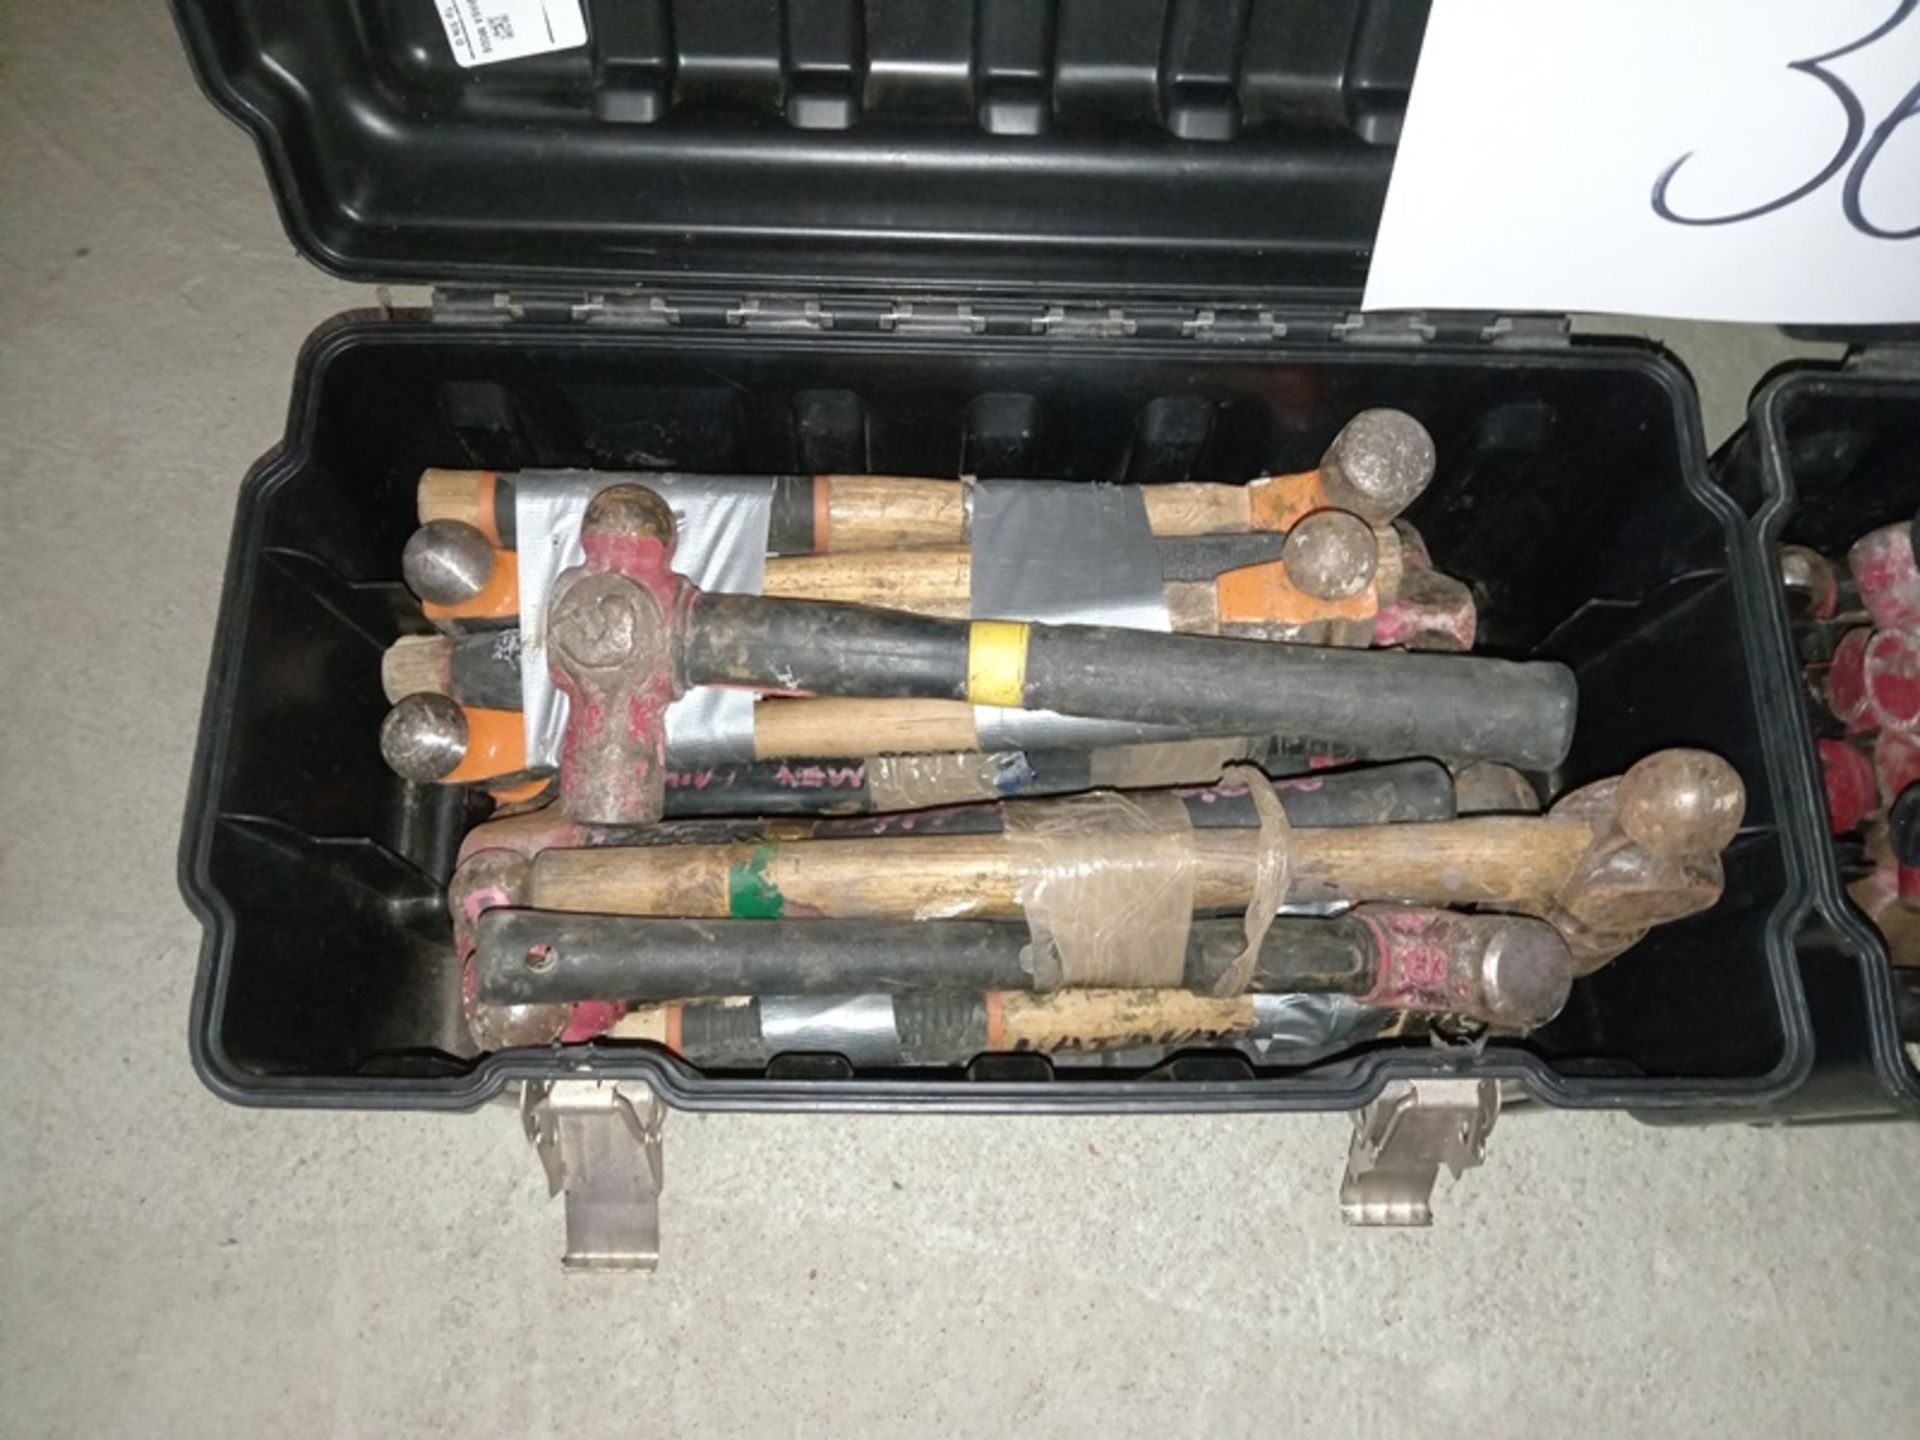 LOT OF (160) STEEL BALL HAMMERS 1500 GR (3LBS) - Image 3 of 4